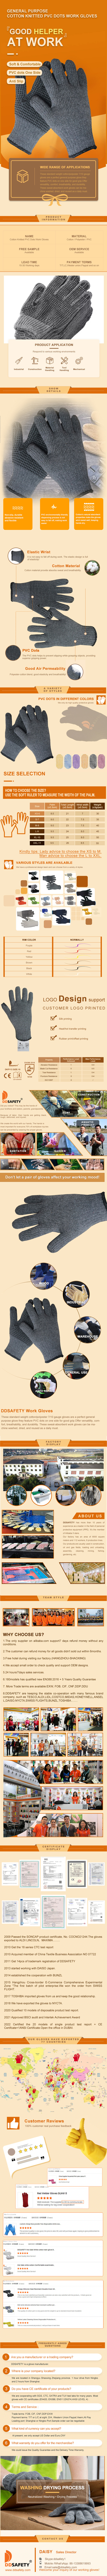 Cotton Polyester String KnitSafety Protection Work Gloves Canvas Gloves, non-slip Dots, for Painter Warehouse Gardening - DKP113  Cotton Polyester String KnitSafety Protection Work Gloves Canvas Gloves, non-slip Dots, for Painter Warehouse Gardening - DKP113  Safety Protection Work Gloves,Cotton Polyester String Knit Gloves Canvas,Protection Work Gloves Canvas Glove